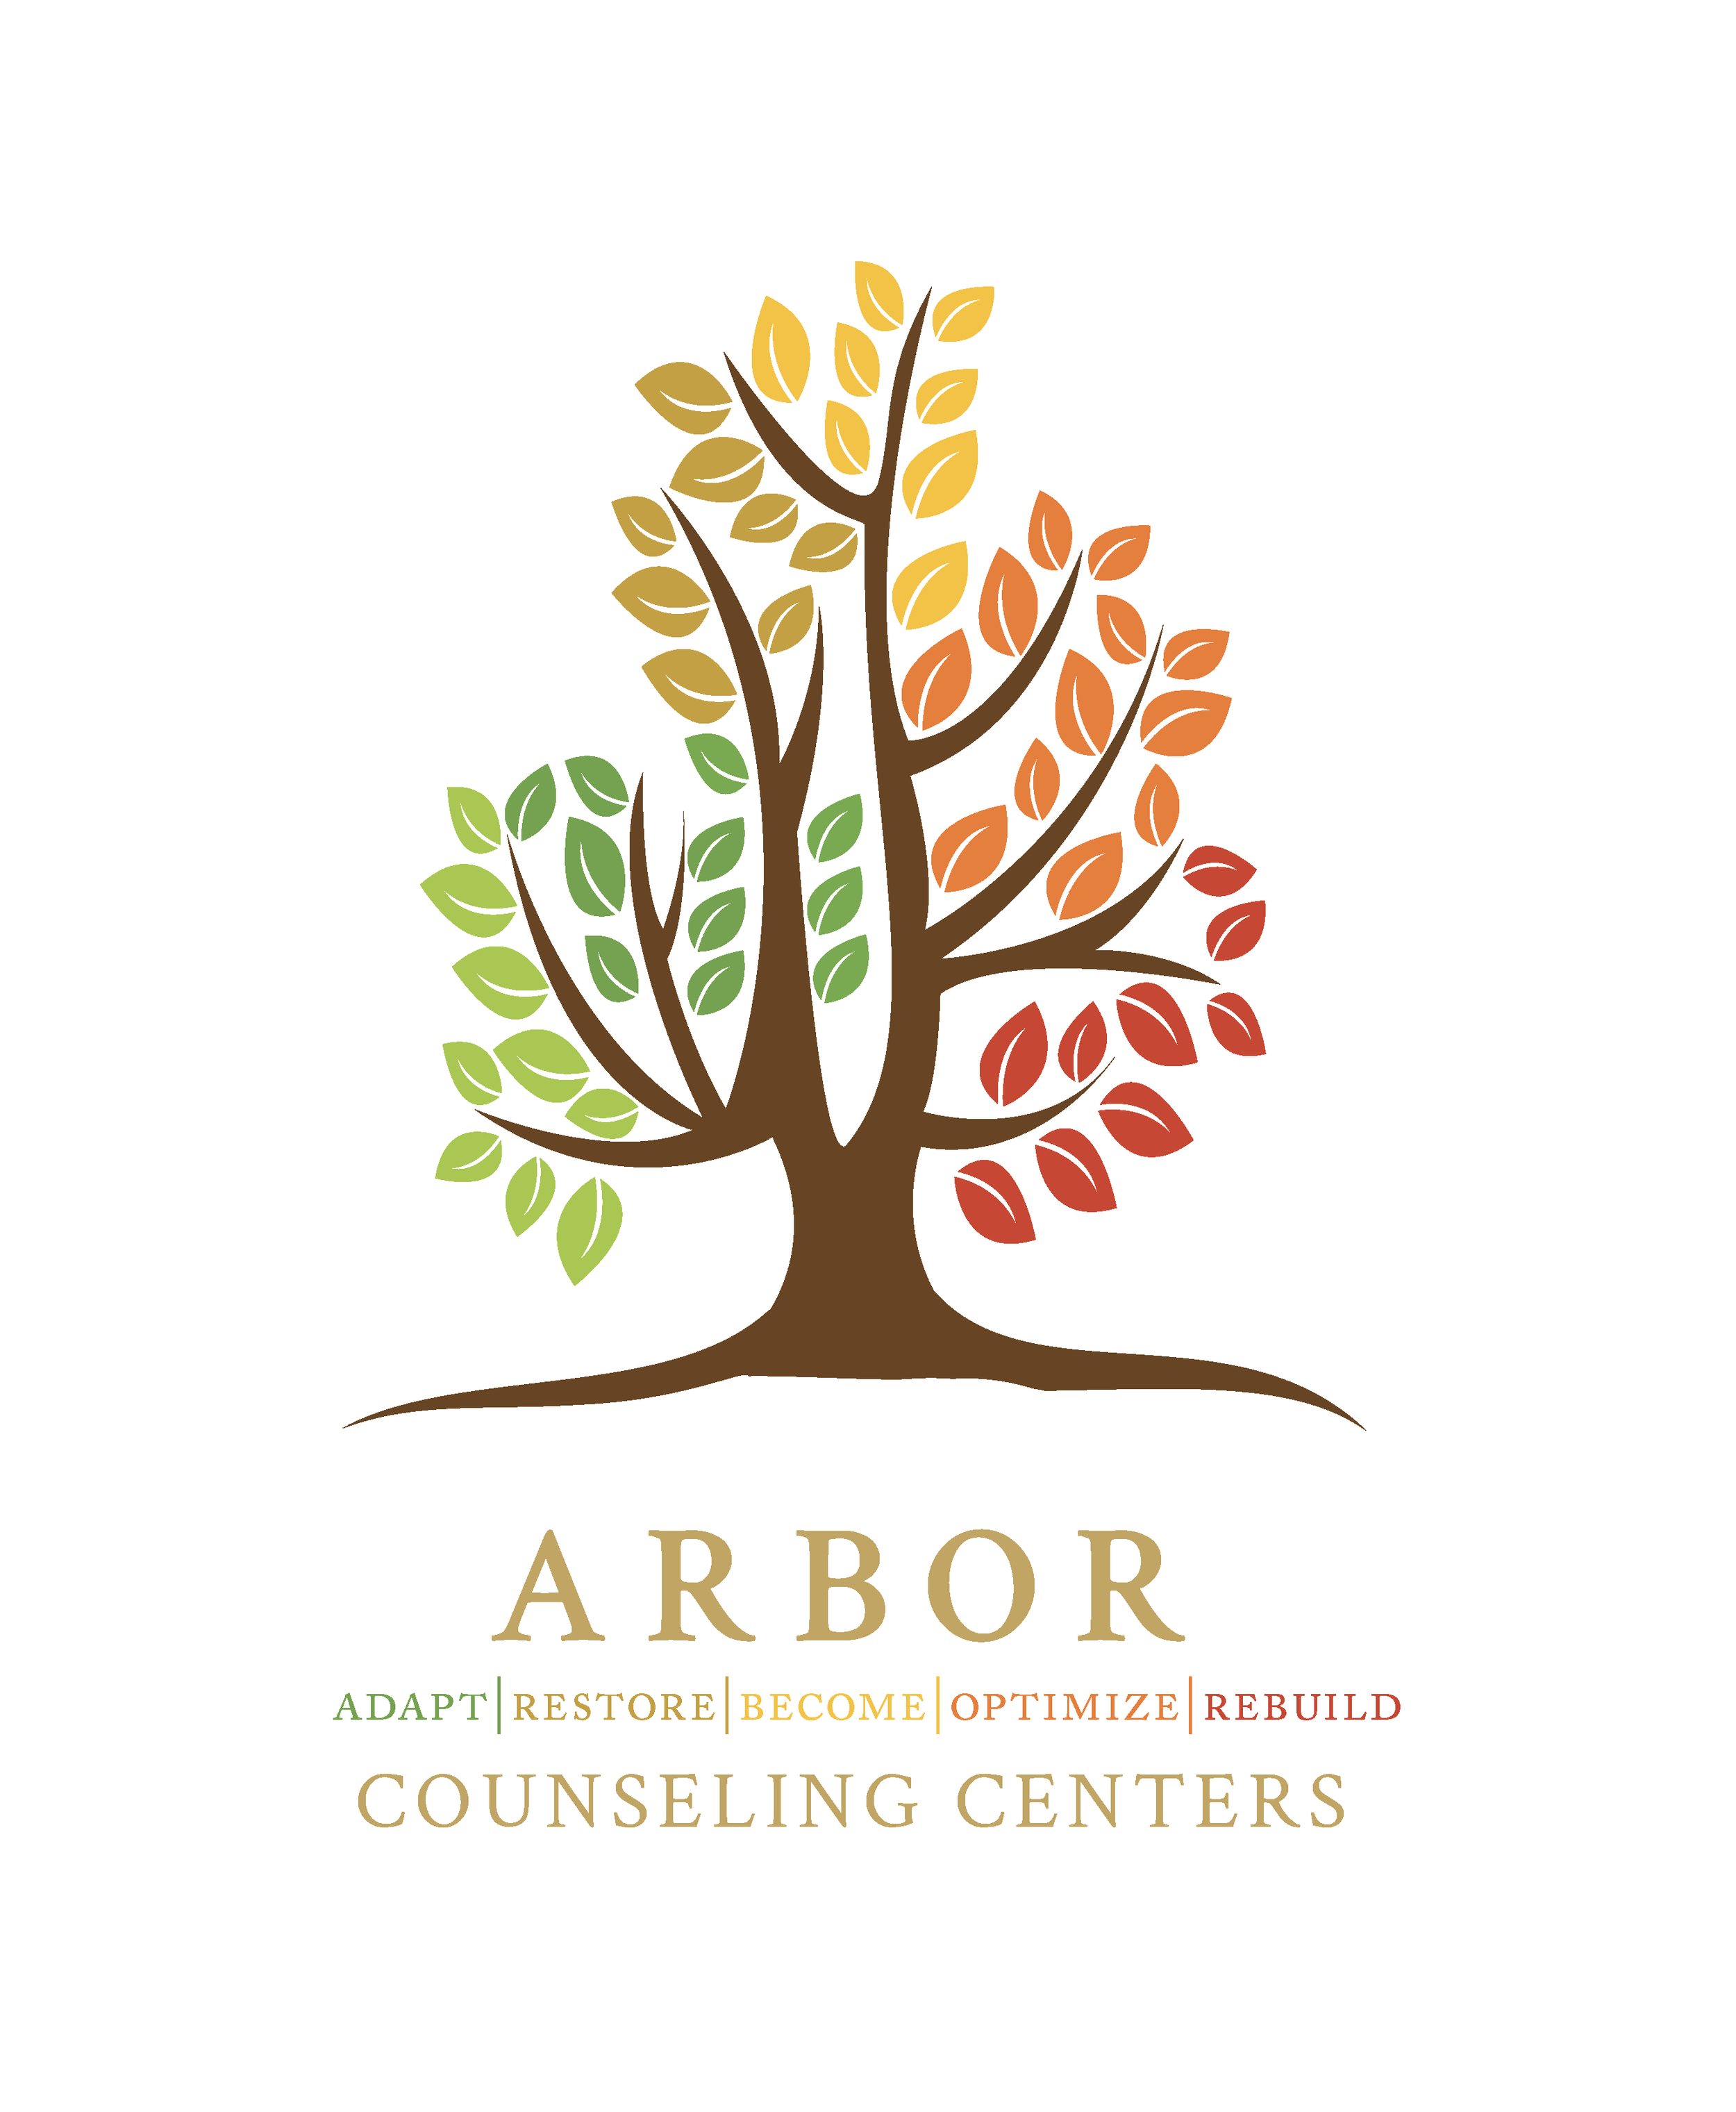 ARBOR Counseling Centers